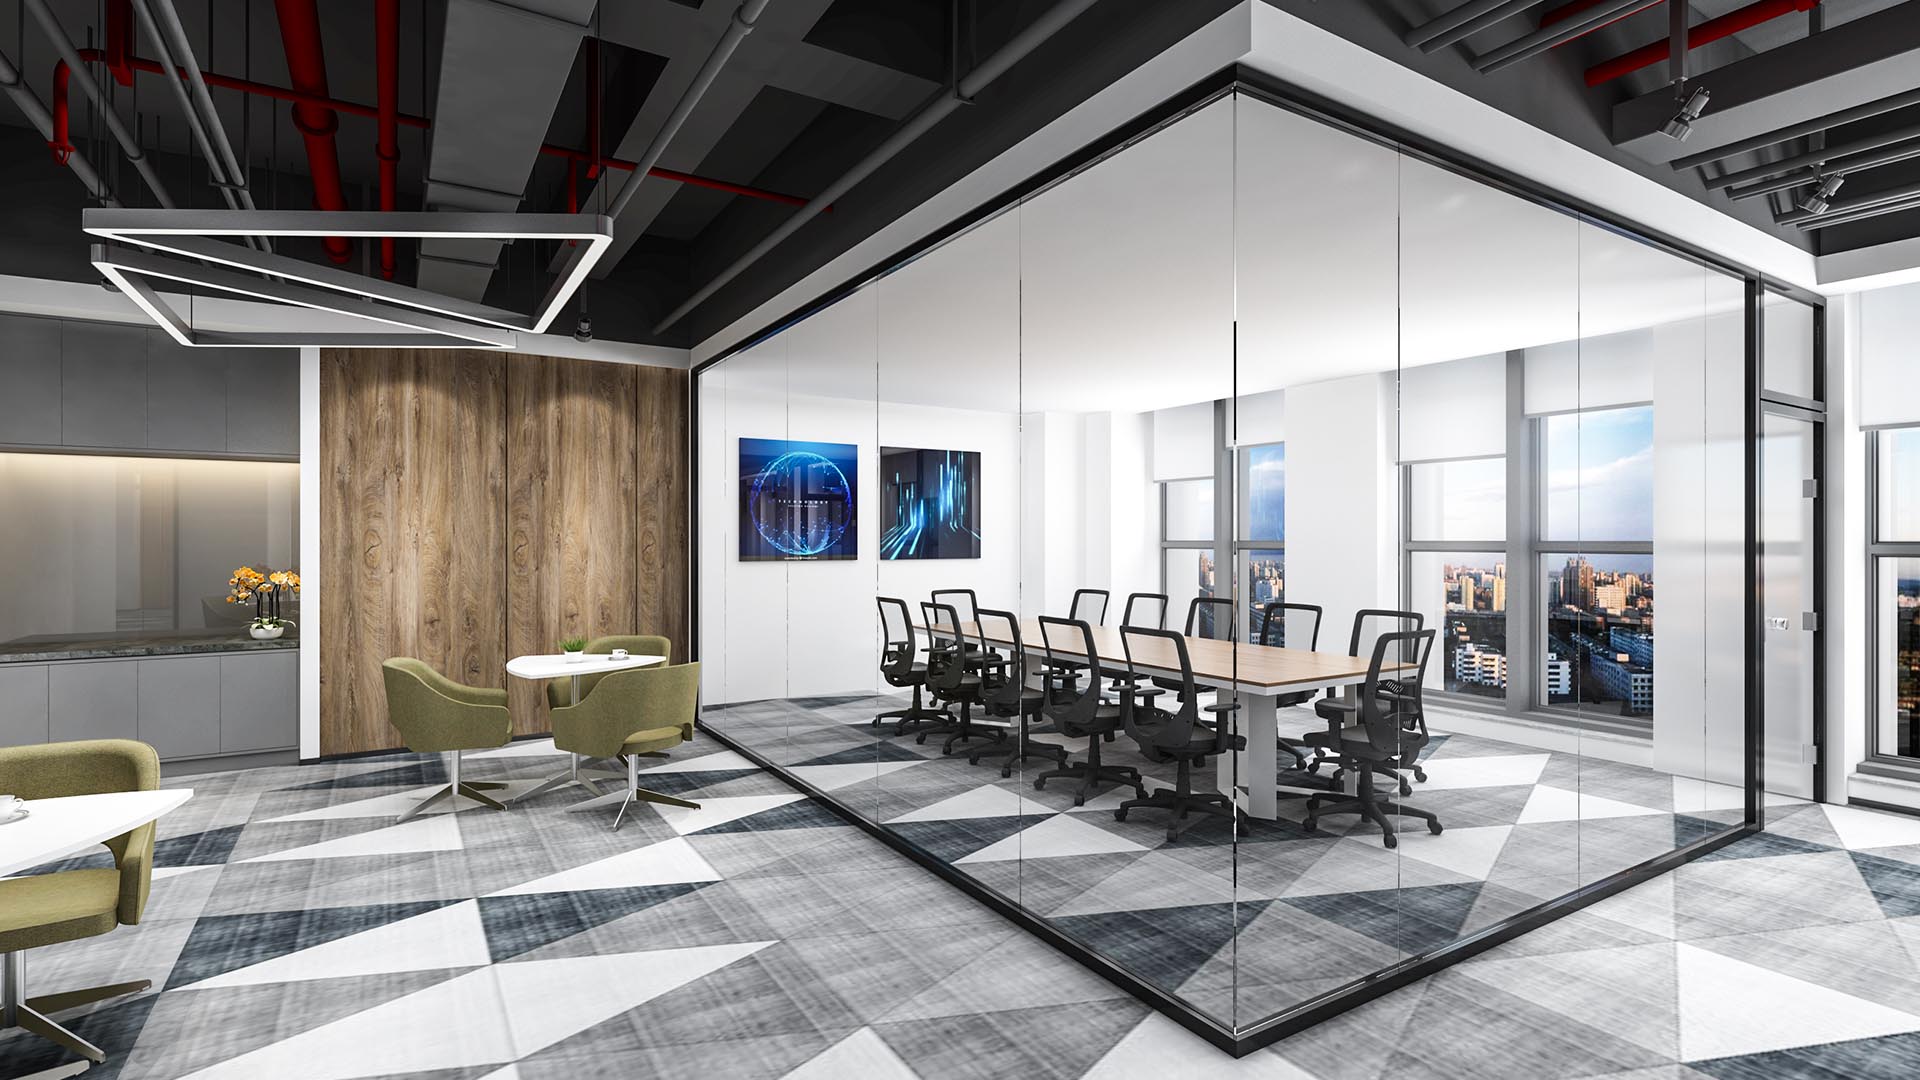 Design Inspiration: Transforming Your Office Space